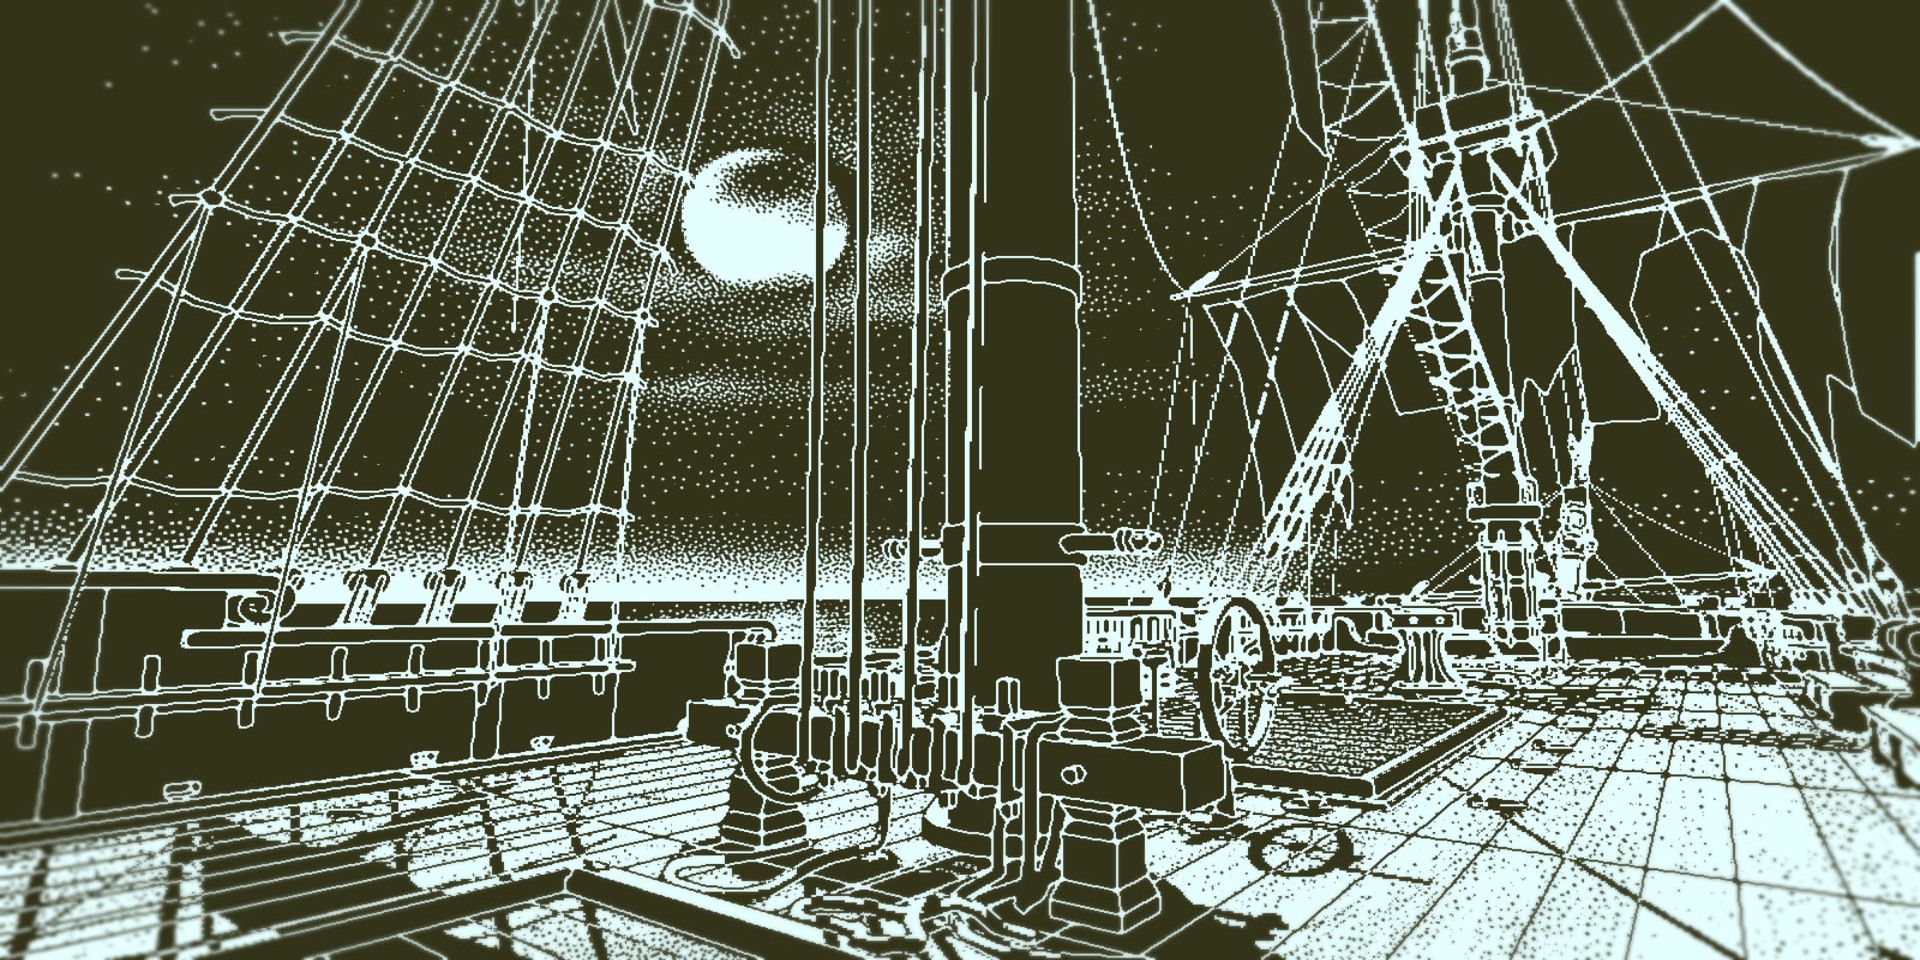 Gameplay showing the deck of the Obra Dinn